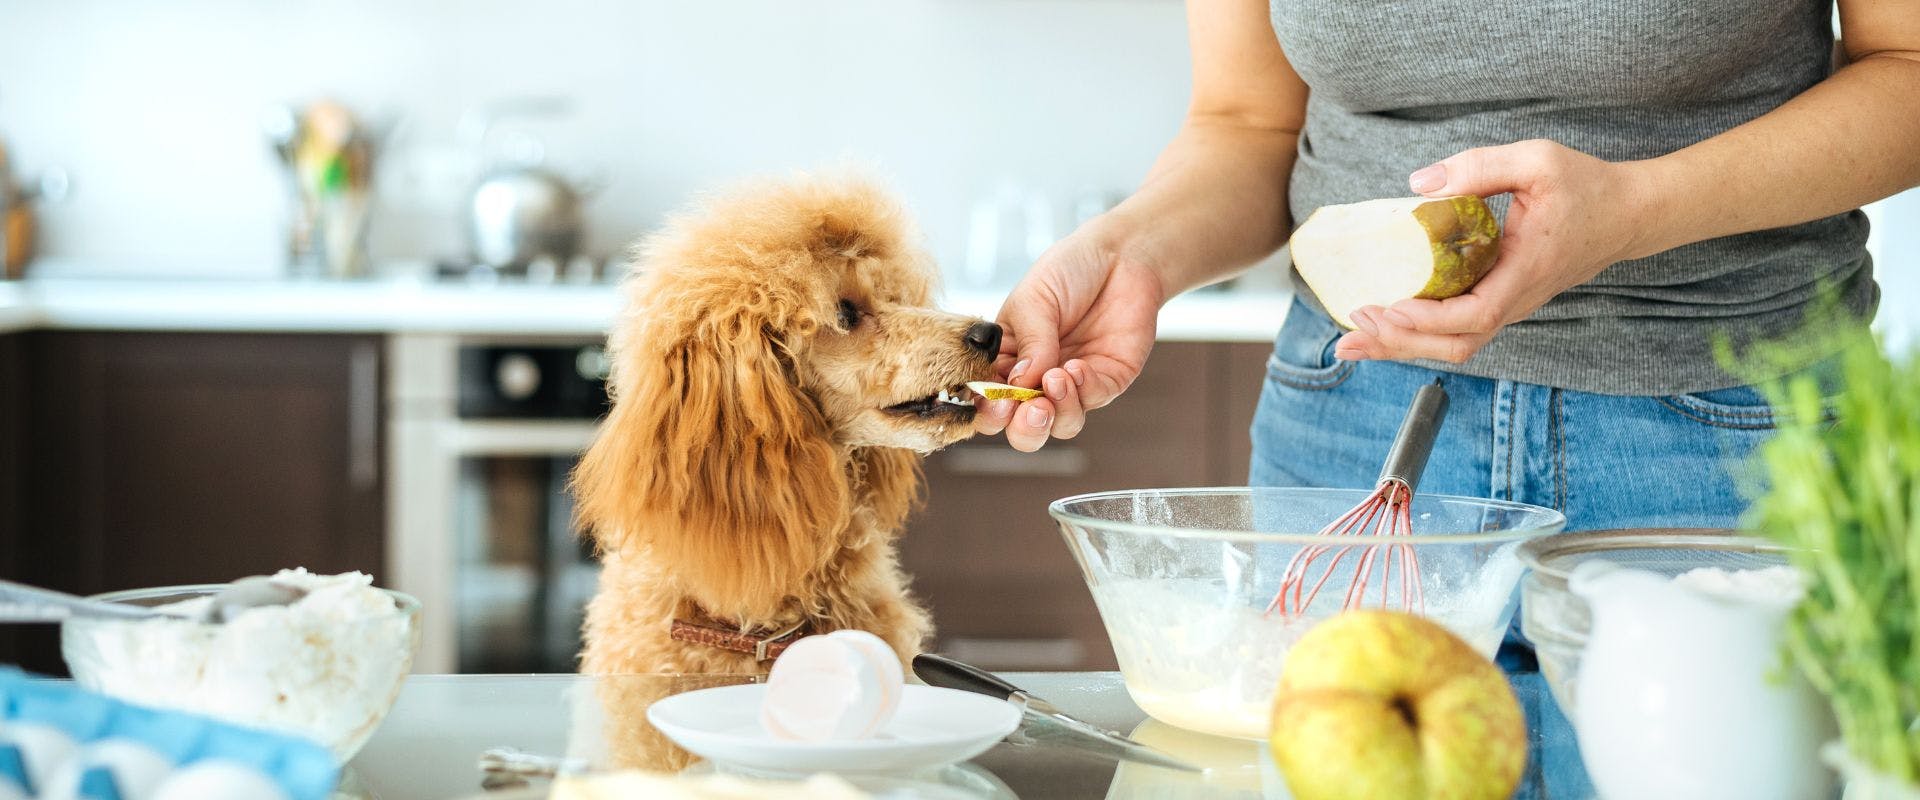 Poodle being fed a slice of pair in kitchen